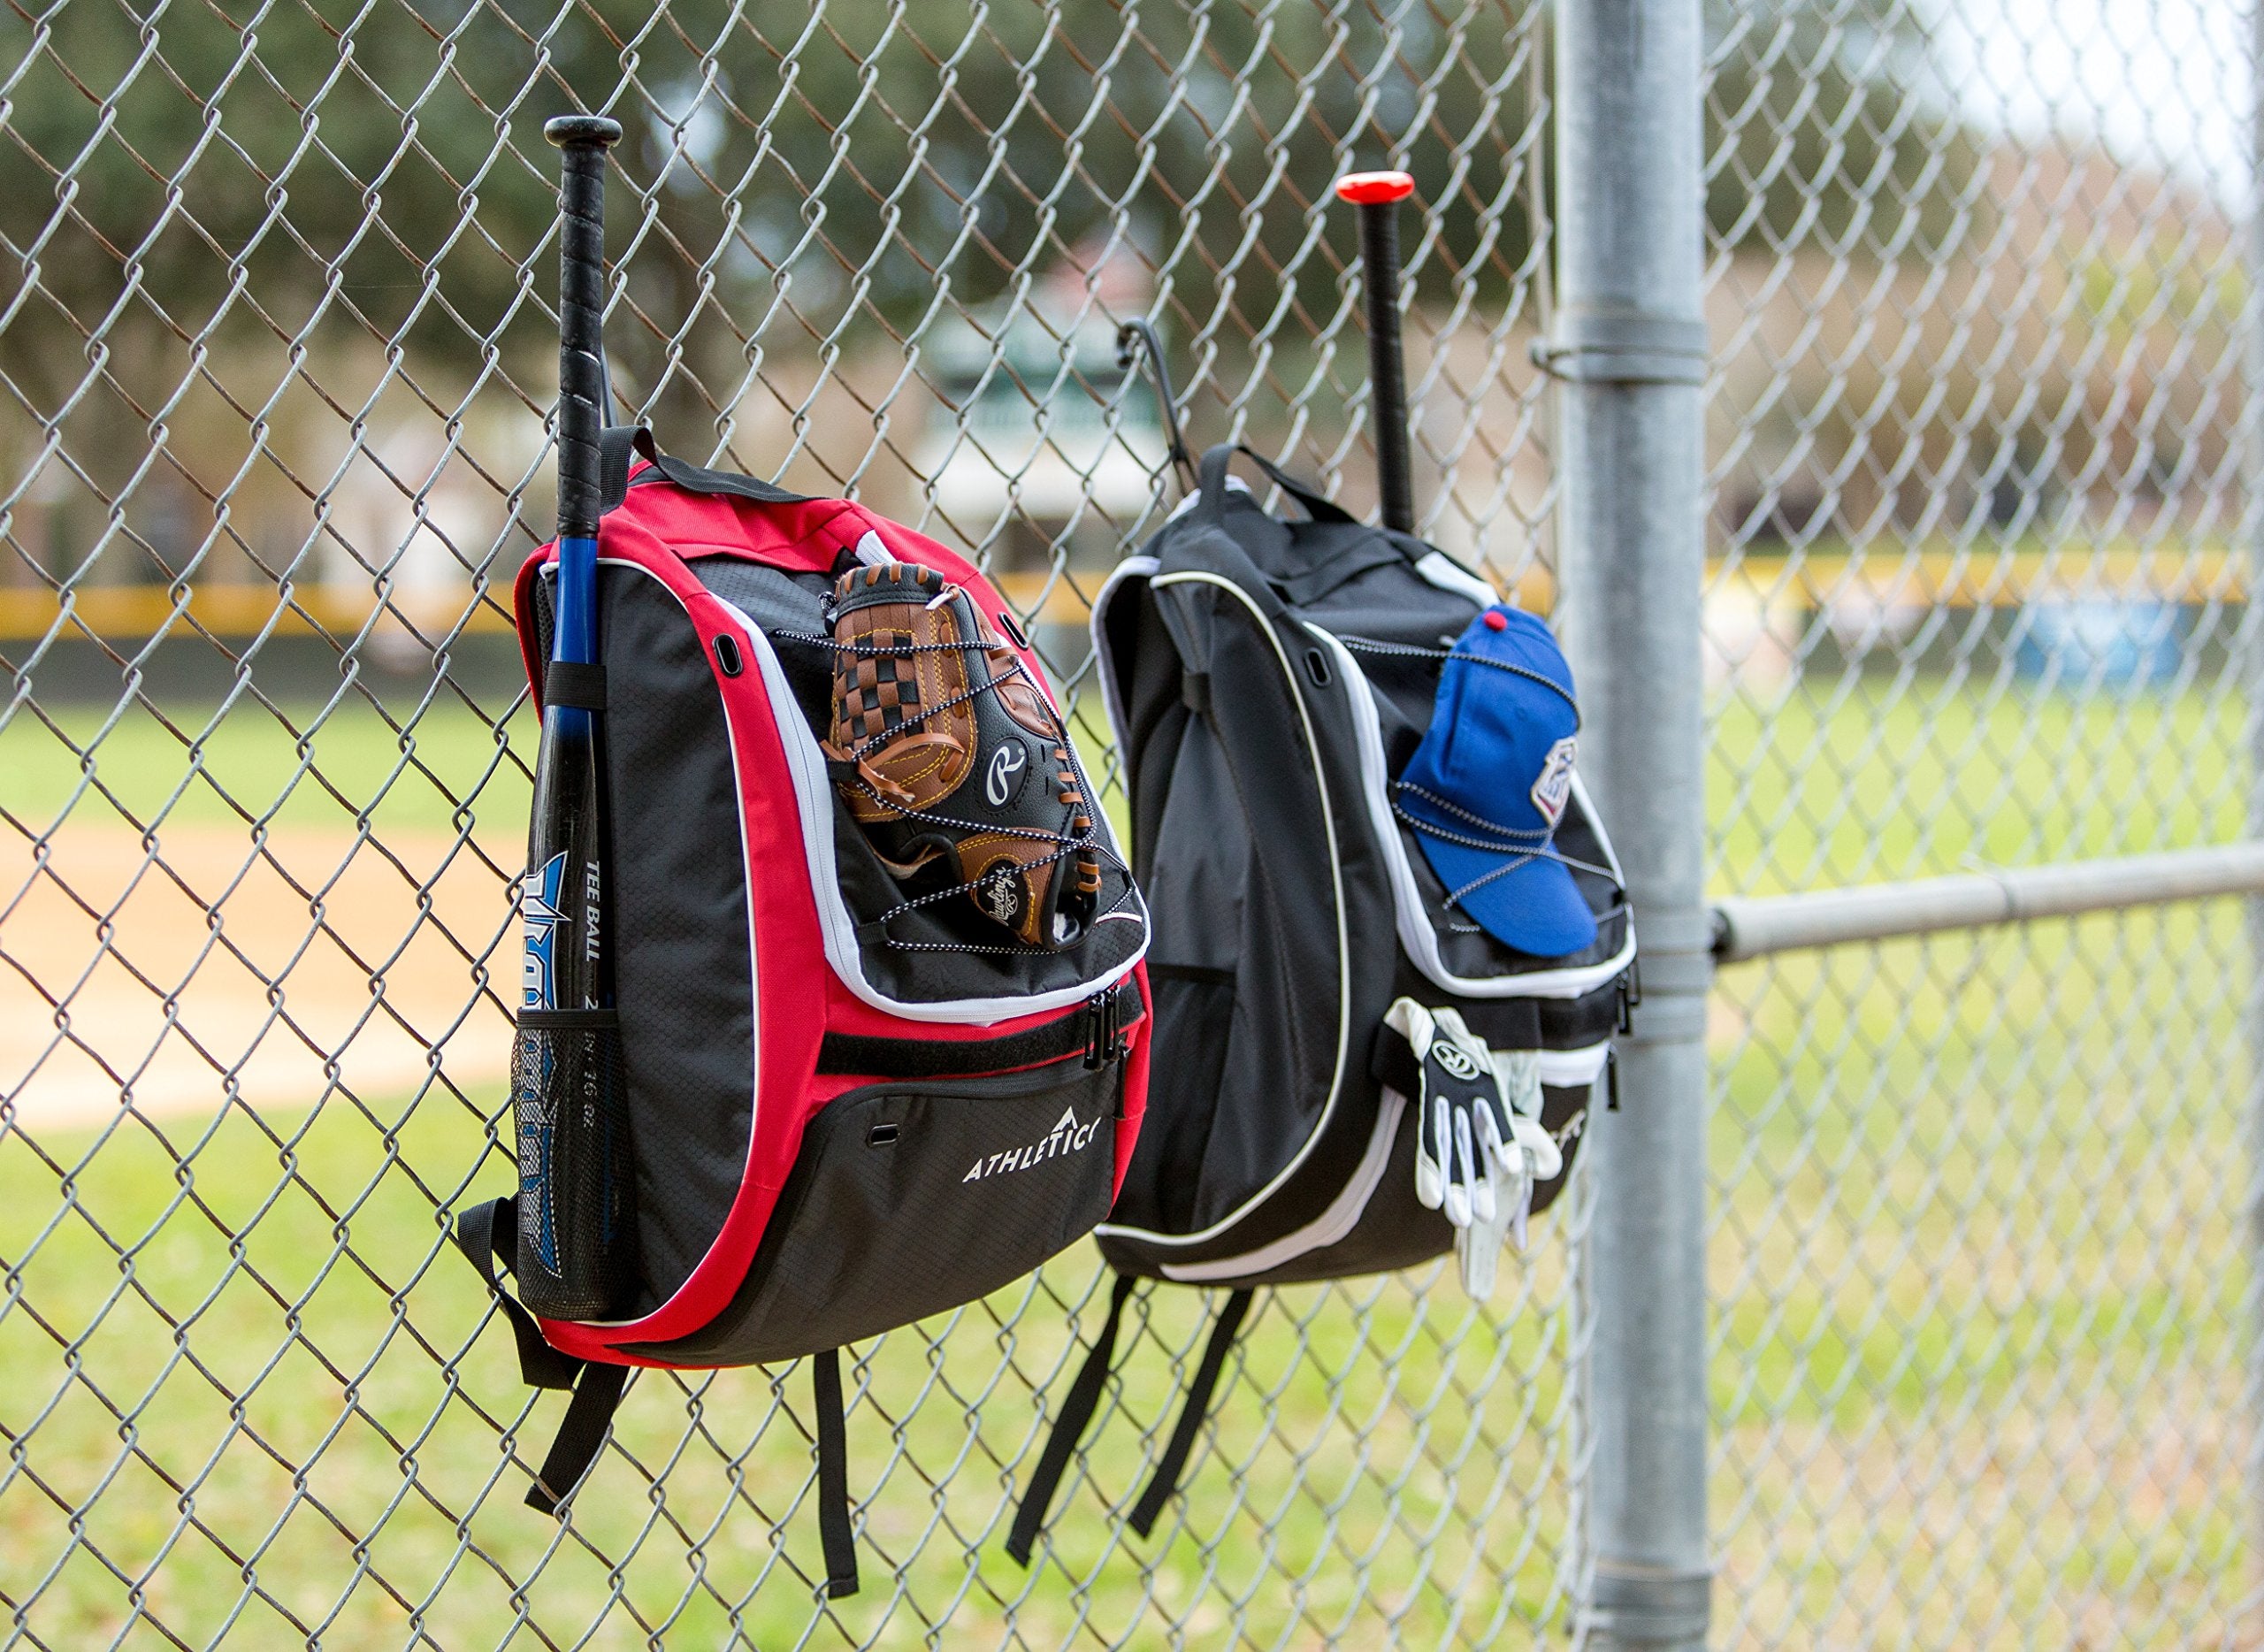 Athletico Baseball Bat Bag - Backpack for Baseball, T-Ball & Softball Equipment & Gear for Youth and Adults | Holds Bat, Helmet, Glove, & Shoes |Shoe Compartment & Fence Hook  - Collectible Very Good